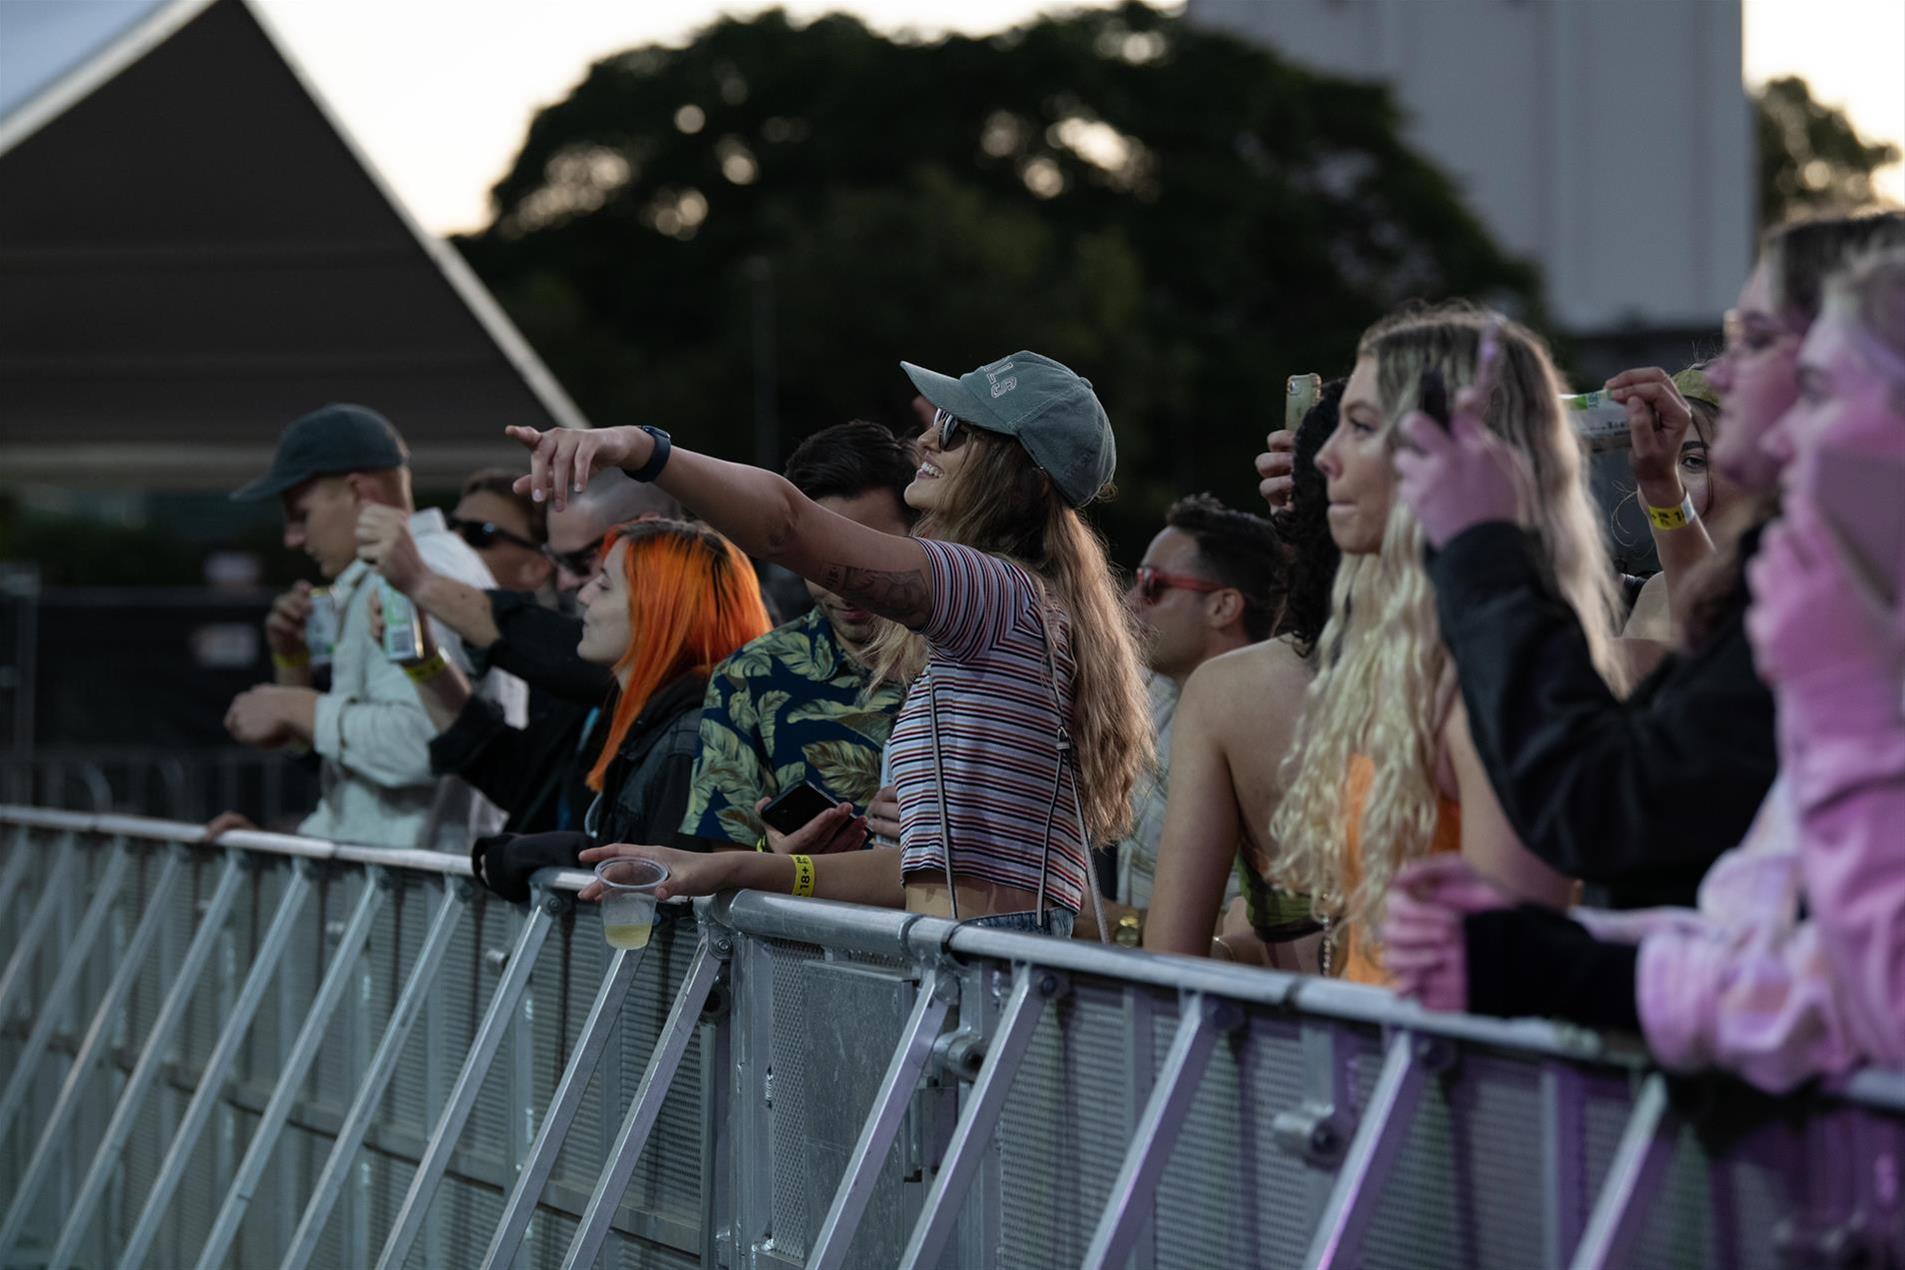 A woman standing in a crowd at a music festival.